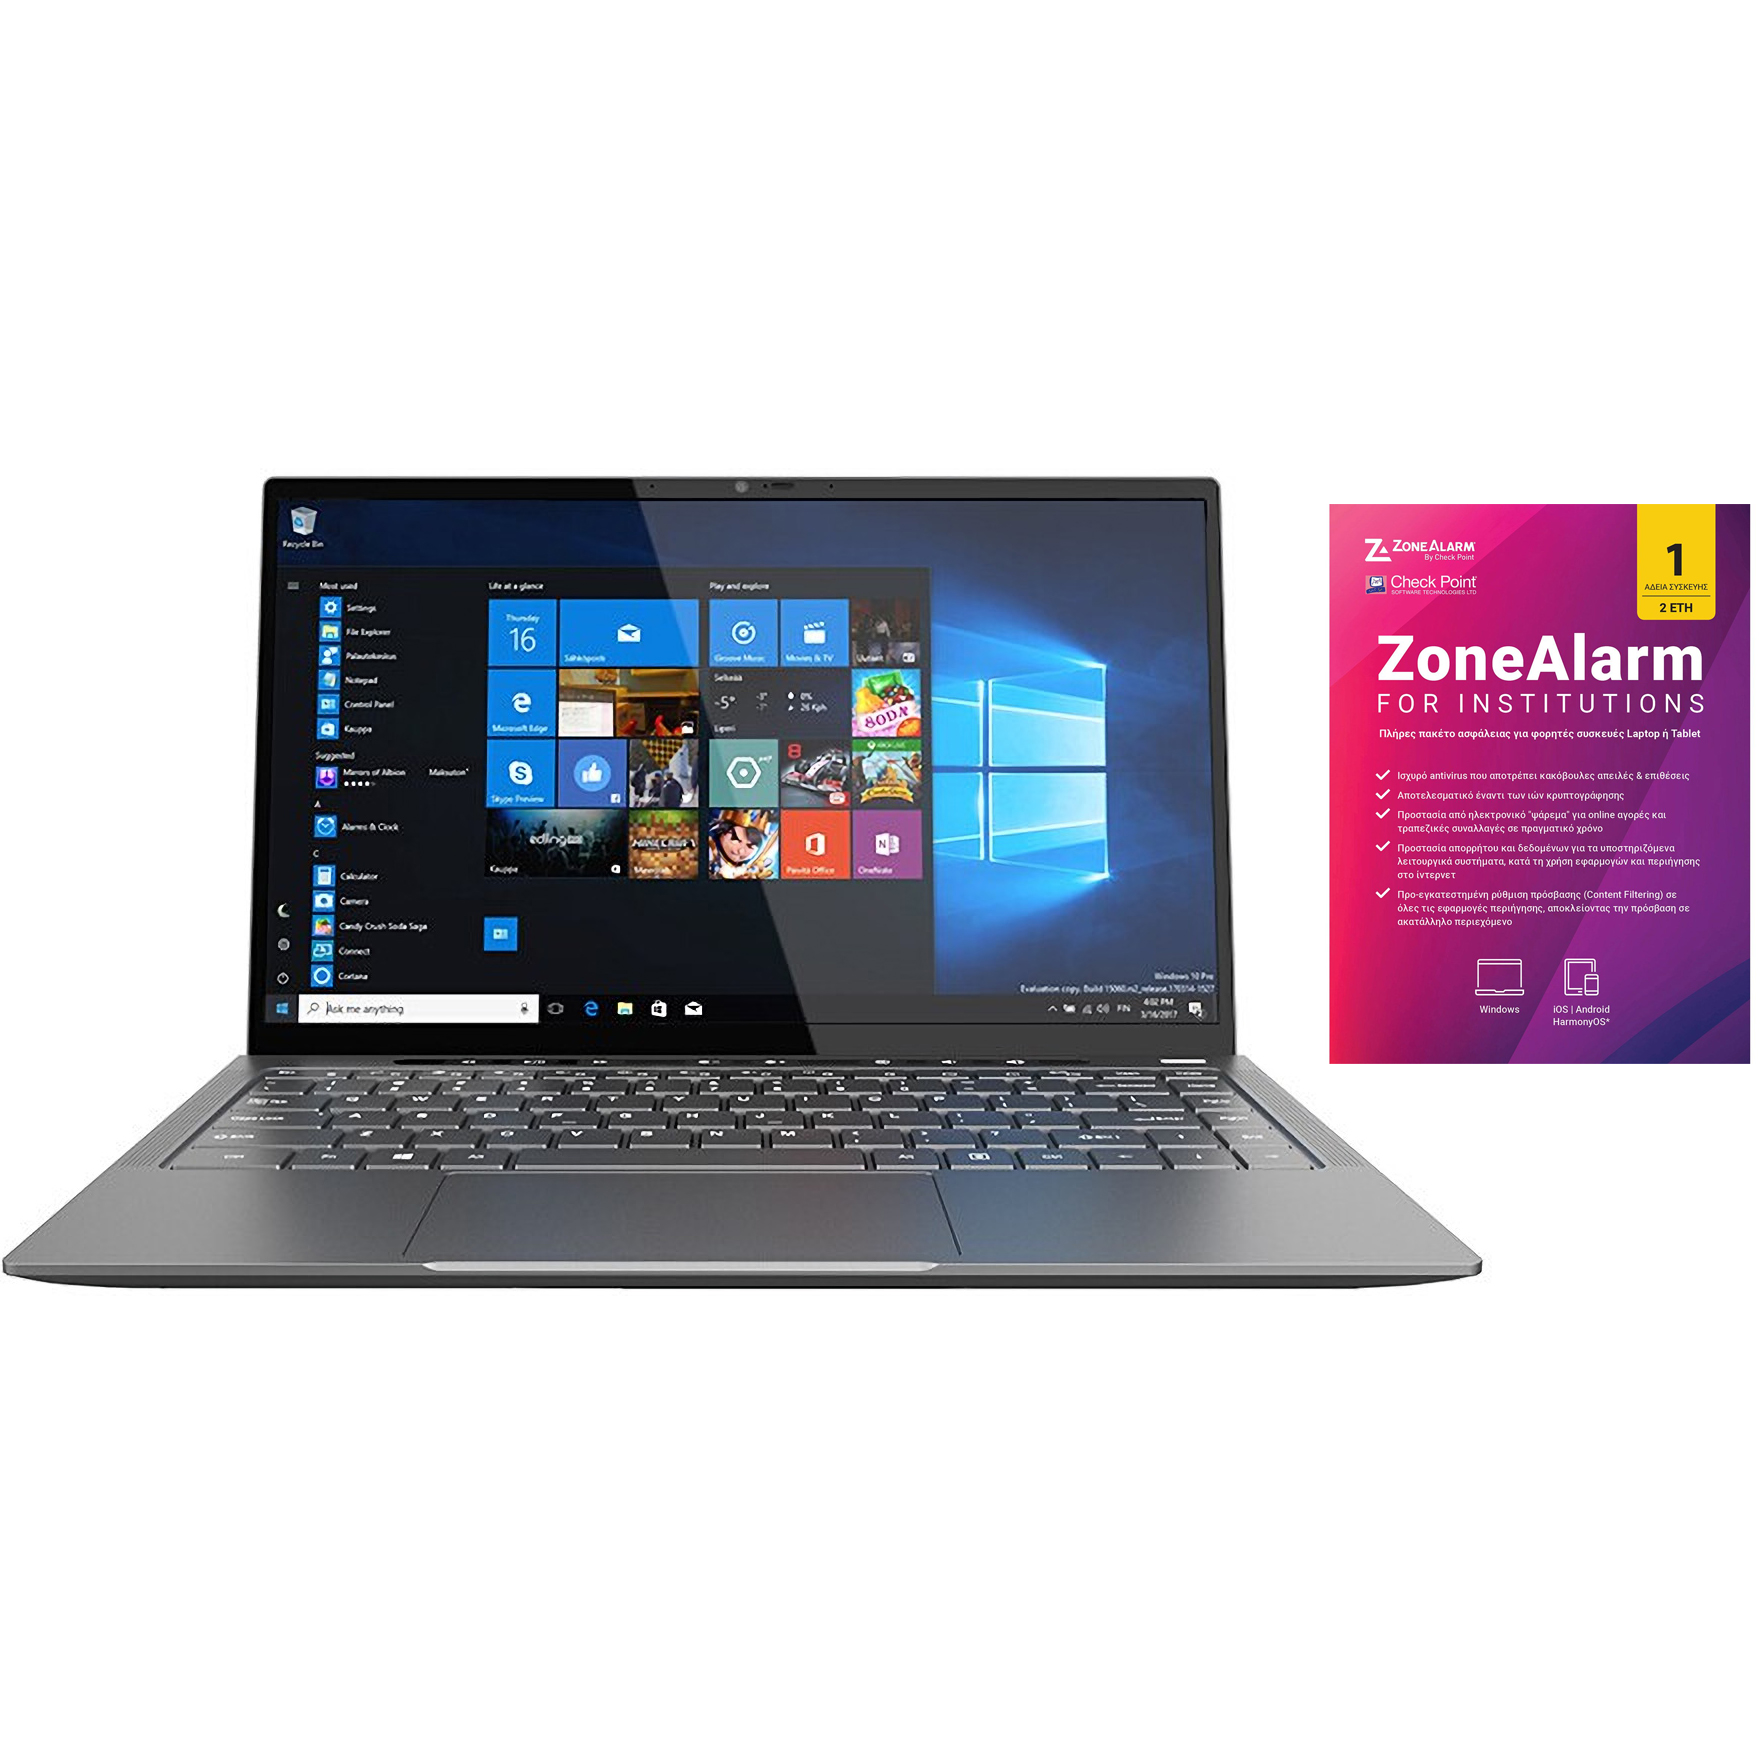 Hasee Laptop HAUS01 (X4-2020G1) / WIN10 & ZoneAlarm /14.0in /60hZ/IPS(1920x1080)/i3-6157 - Hasee 2.35.67.00.001